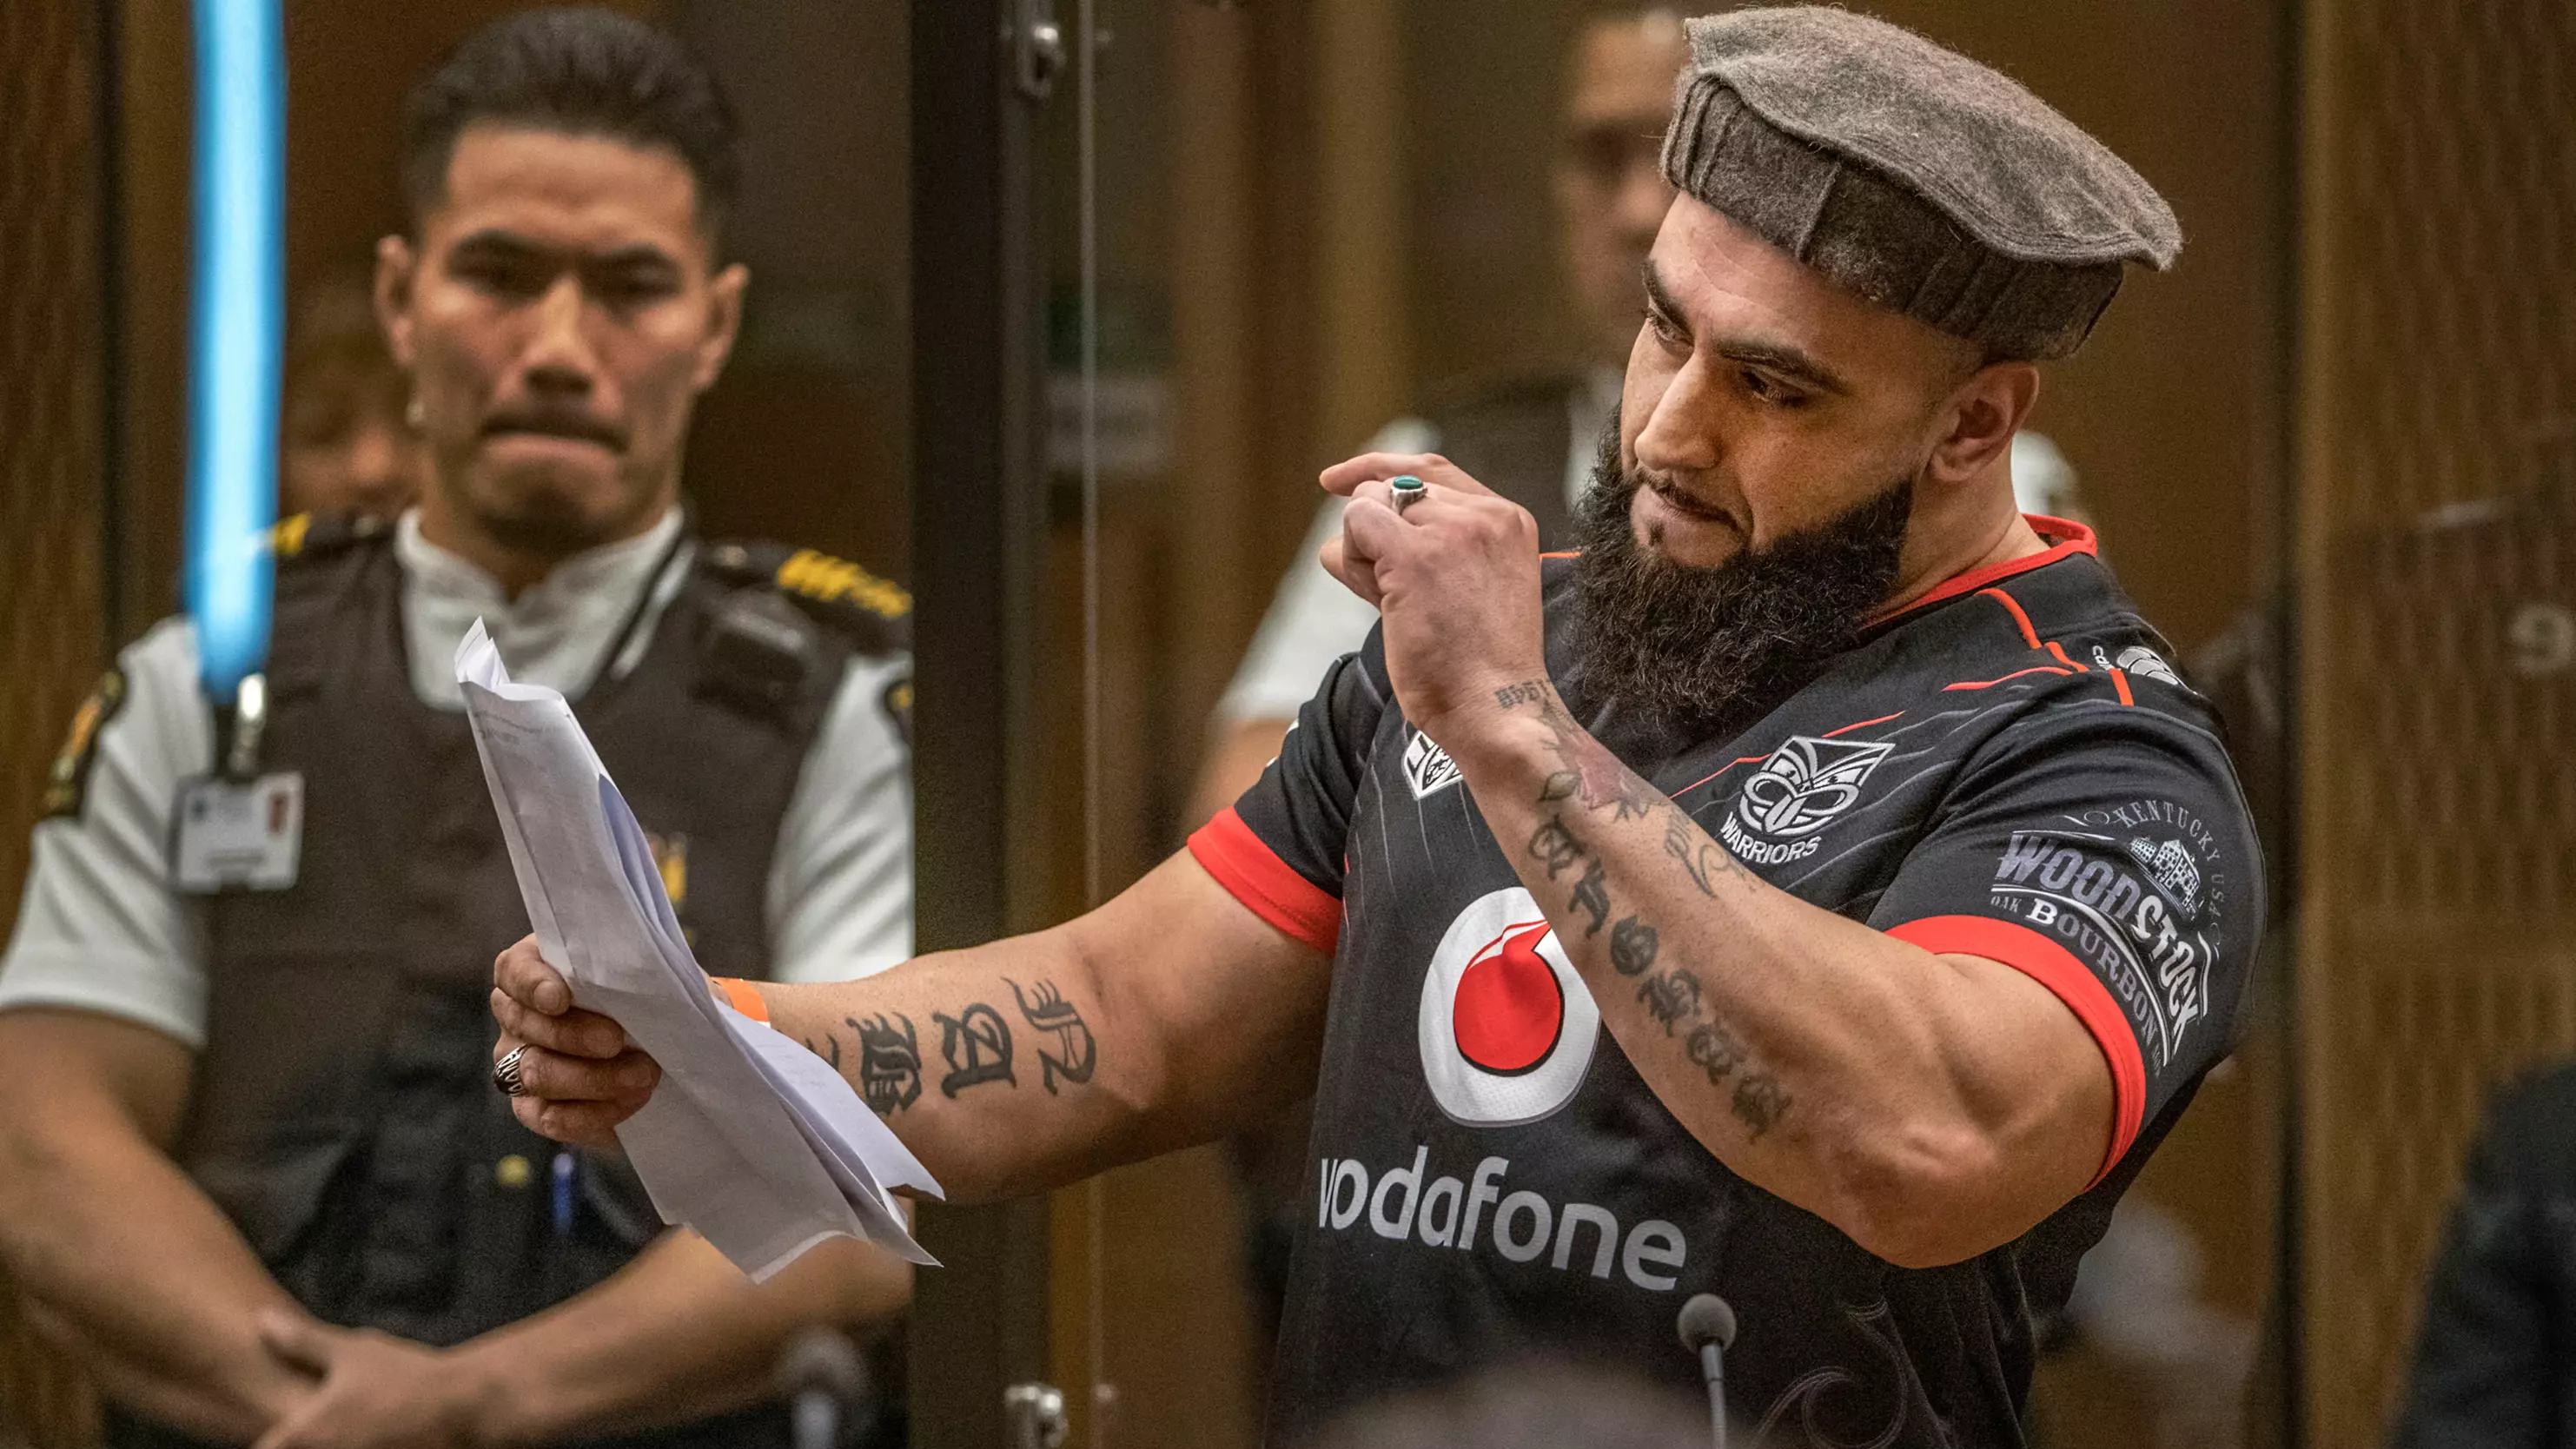 Aussie NRL Fan Sets Up GoFundMe Page To Pay For Christchurch Mosque Victim's Team Membership Fees